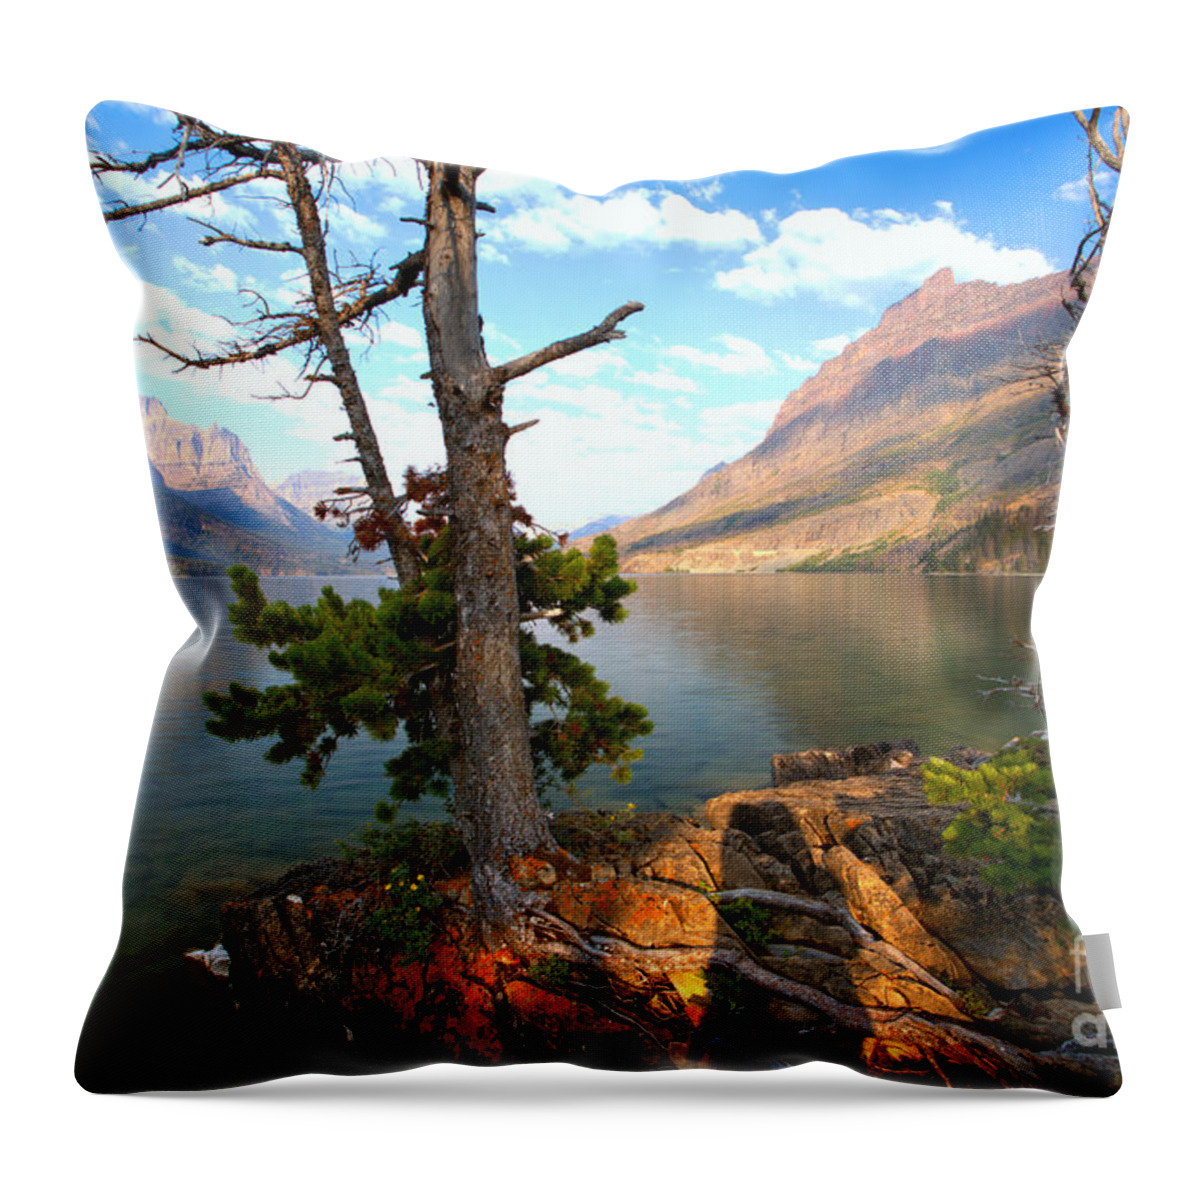 St Mary Throw Pillow featuring the photograph Morning Light Over St. Mary Lake by Adam Jewell